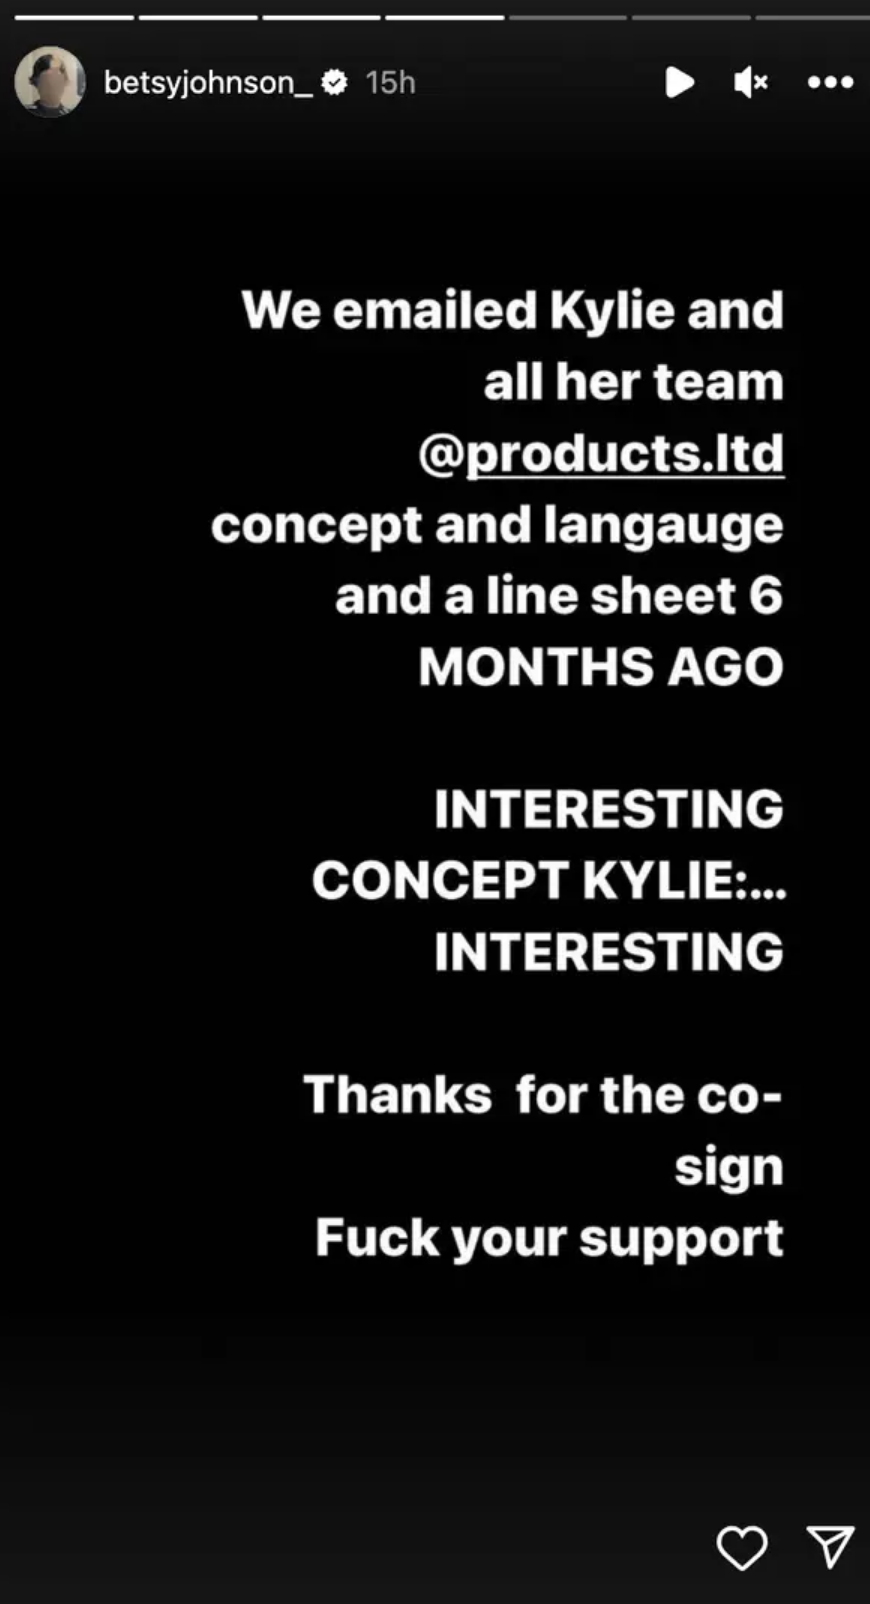 The image shows a screenshot of an Instagram story by user @betsyjohnson_ with a message saying they sent Kylie and her team the products.ltd concept six months ago and saying &quot;interesting concept, kylie&quot; and  &quot;thanks for the co-sign&quot;